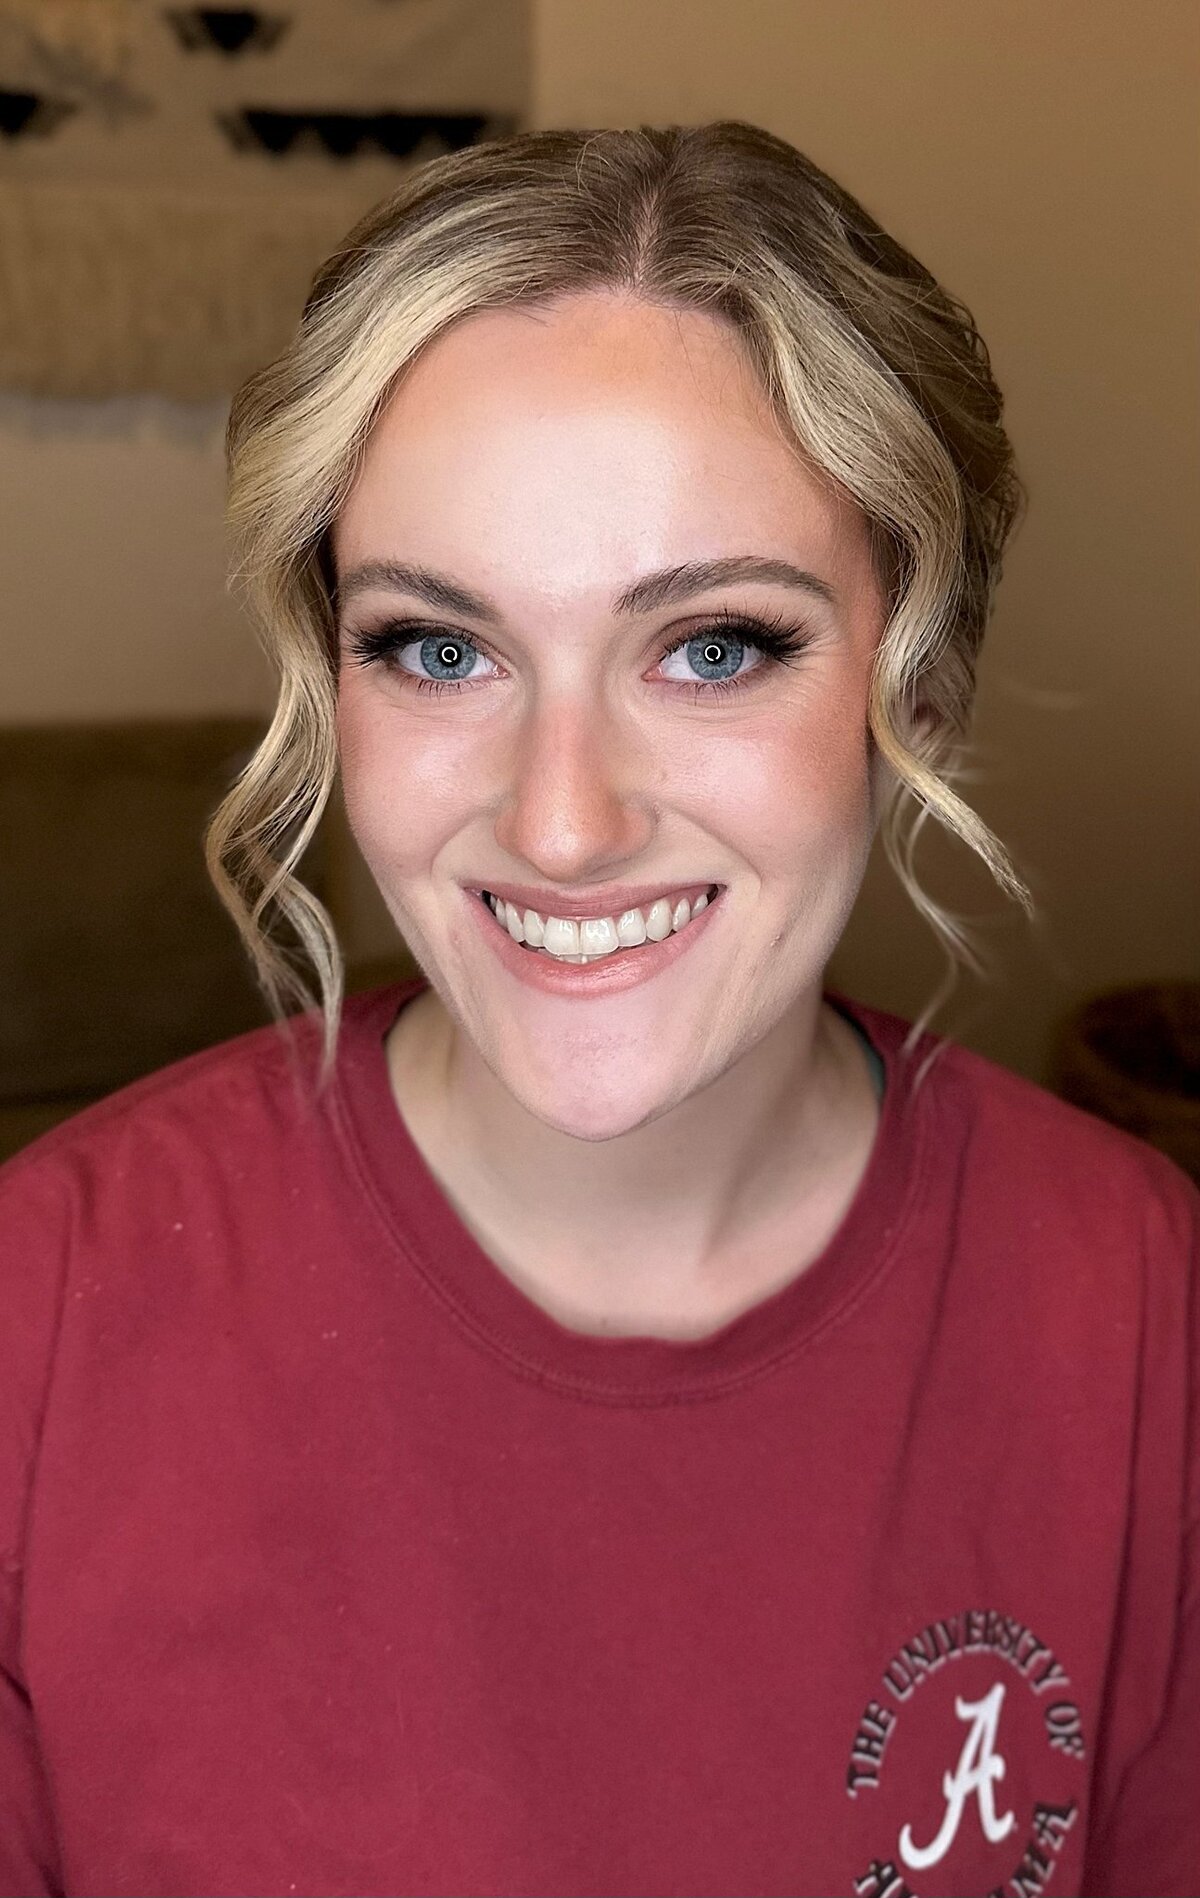 bronze glam makeup with nude lip for bride or bridesmaid